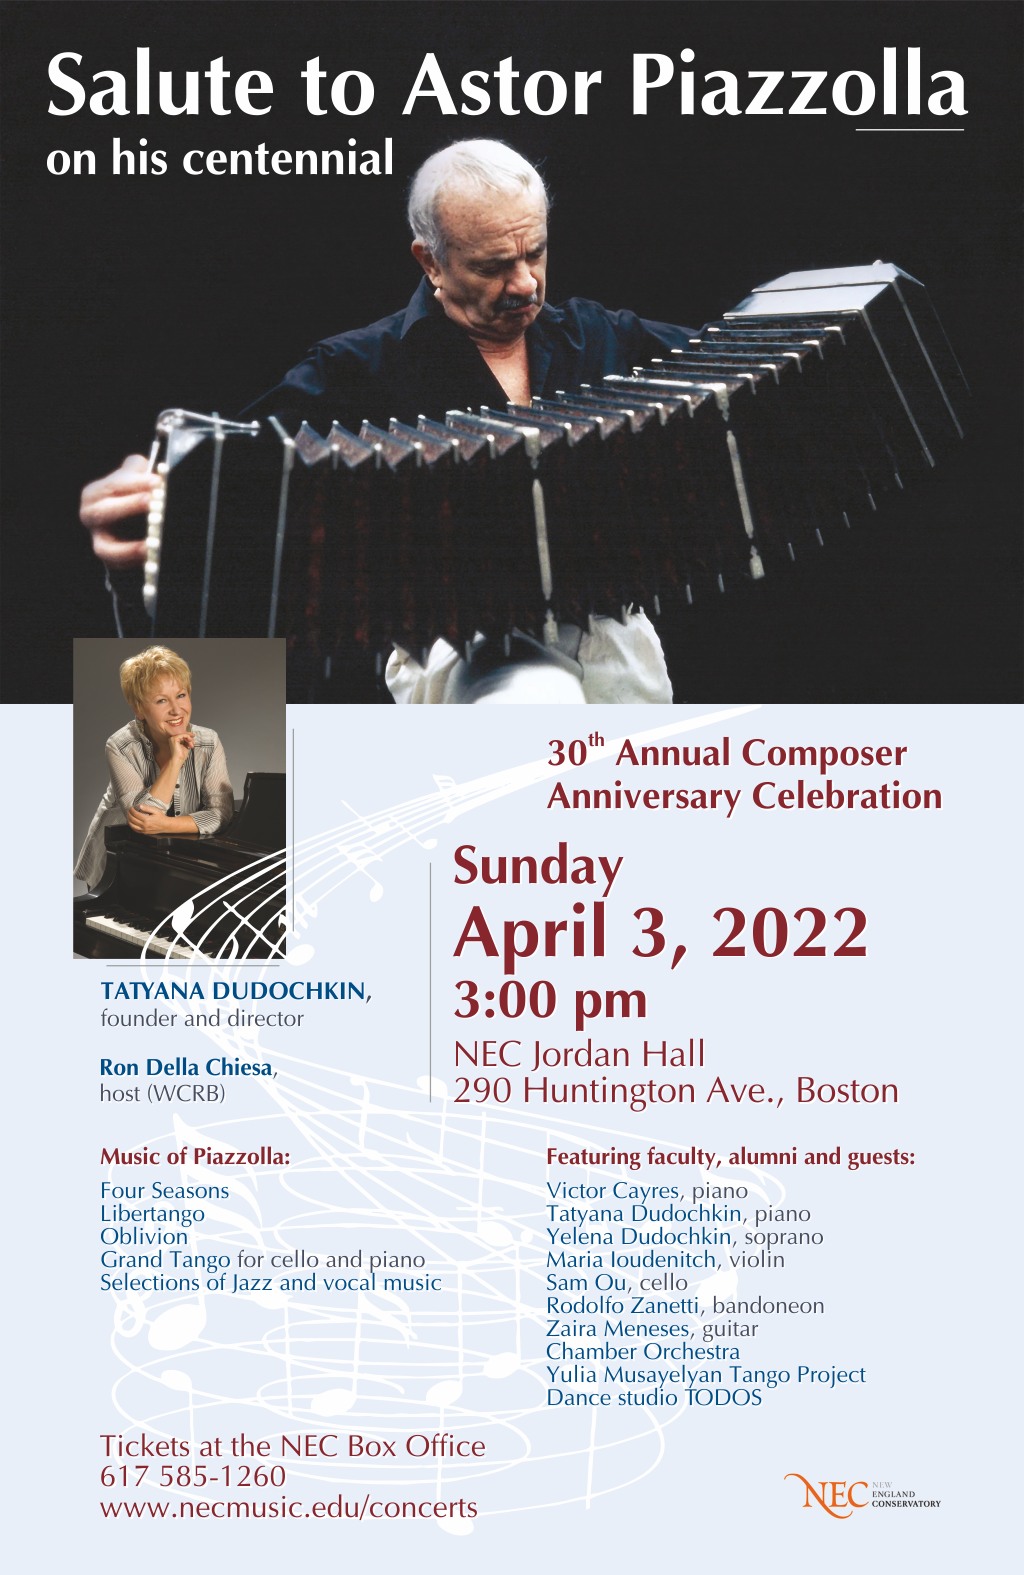 Salute to Astor Piazzolla: 30th Annual Composer Anniversary Celebration